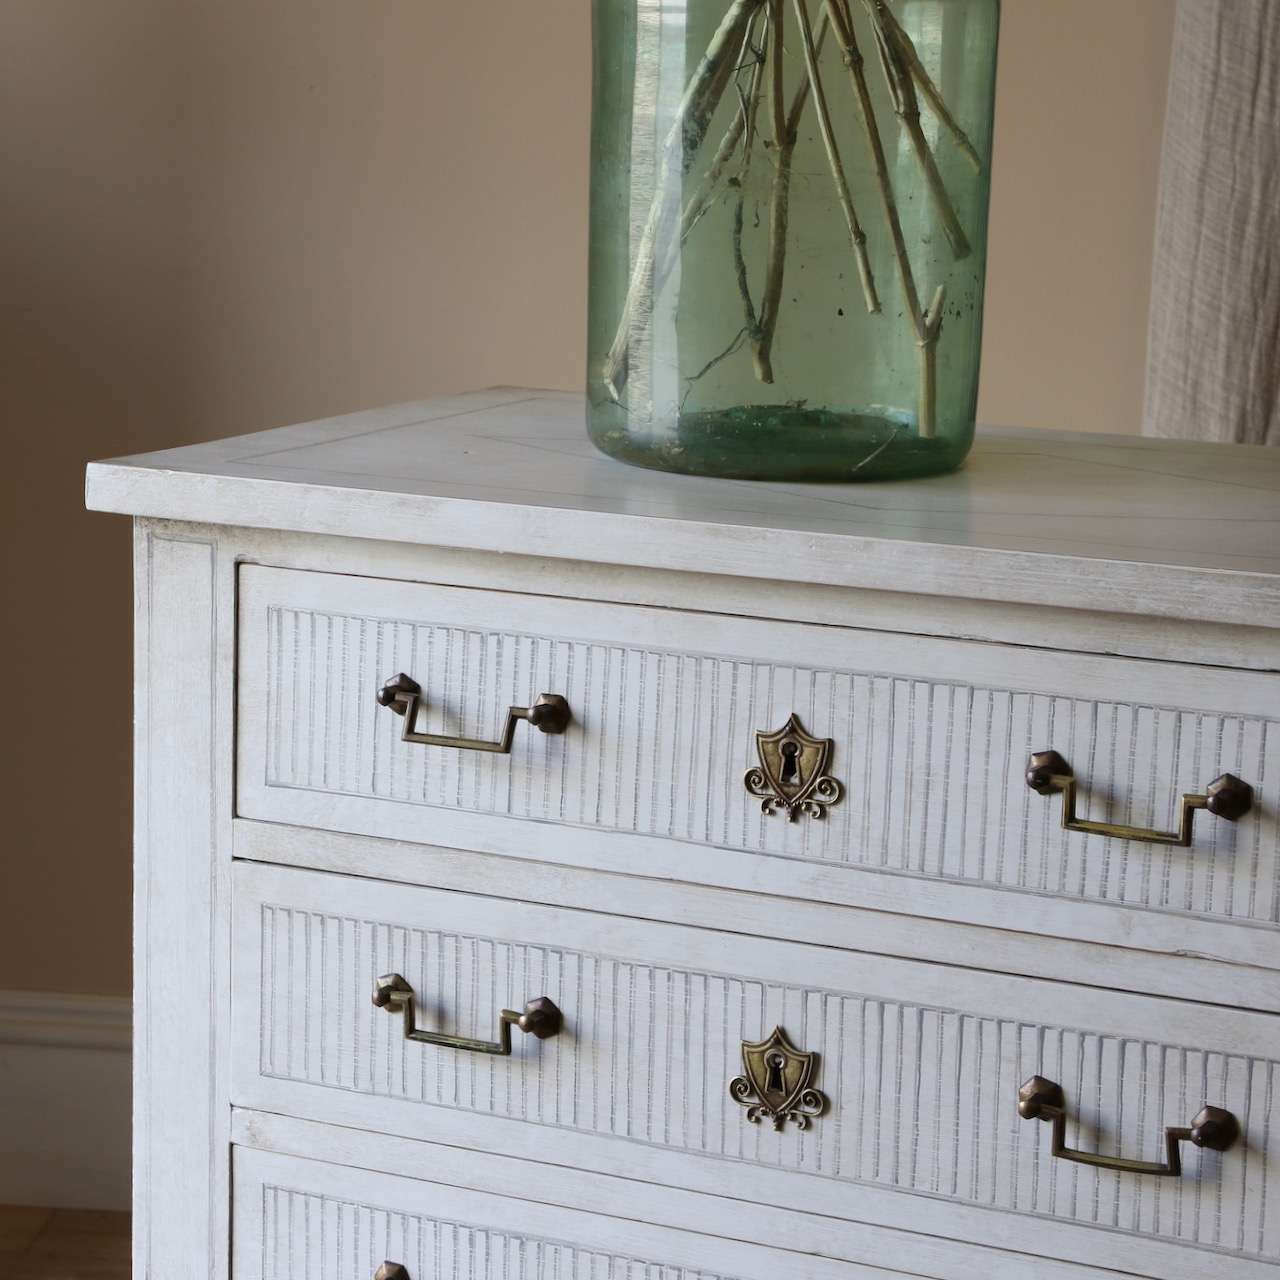 Gustavian Chest of Drawers